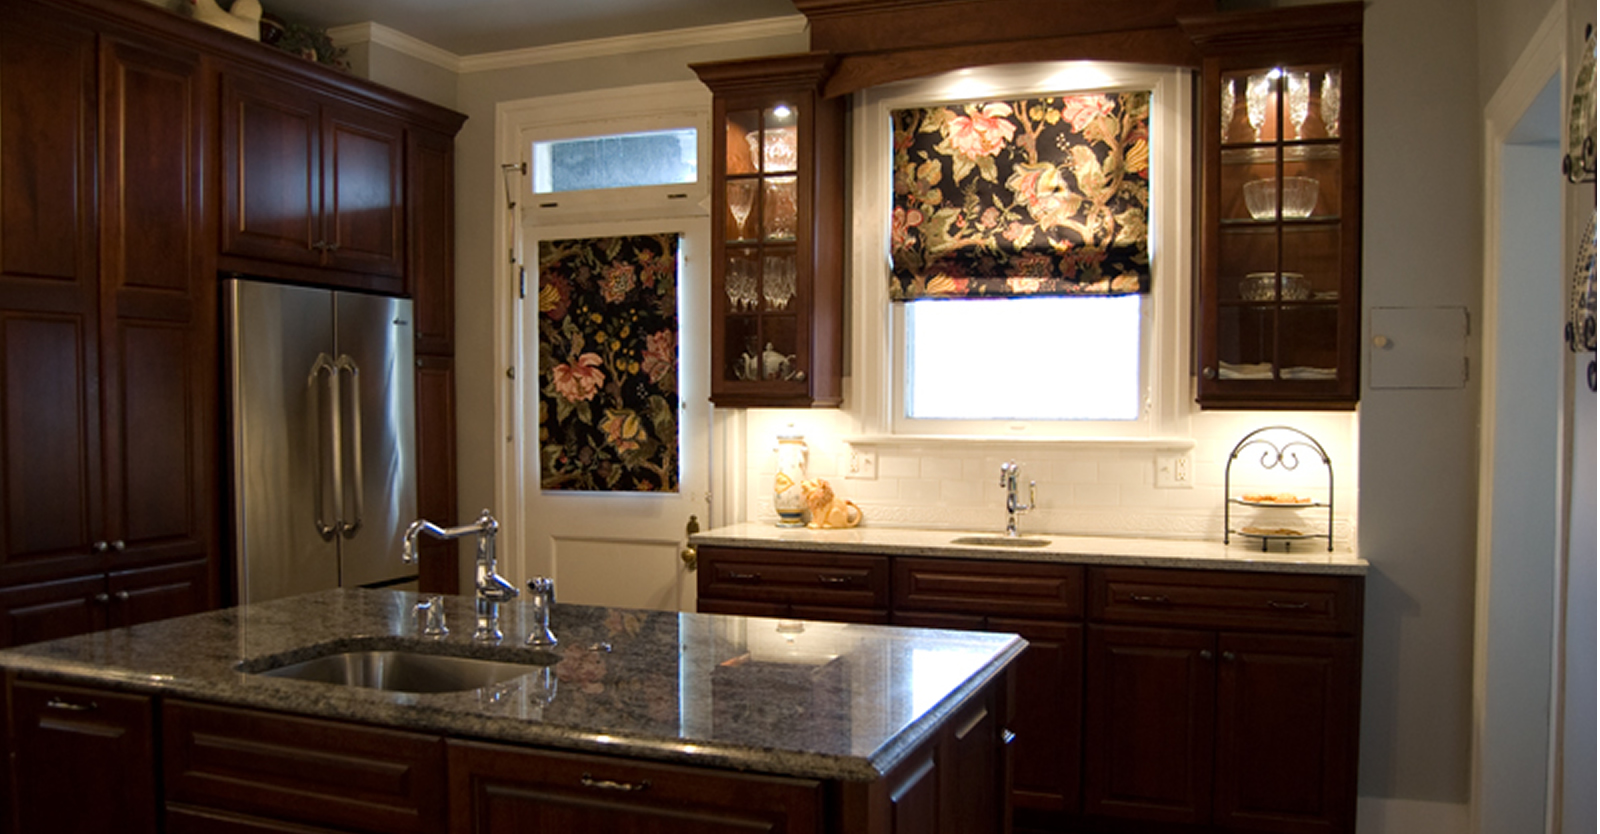 Featured image for “Kitchen Remodel”